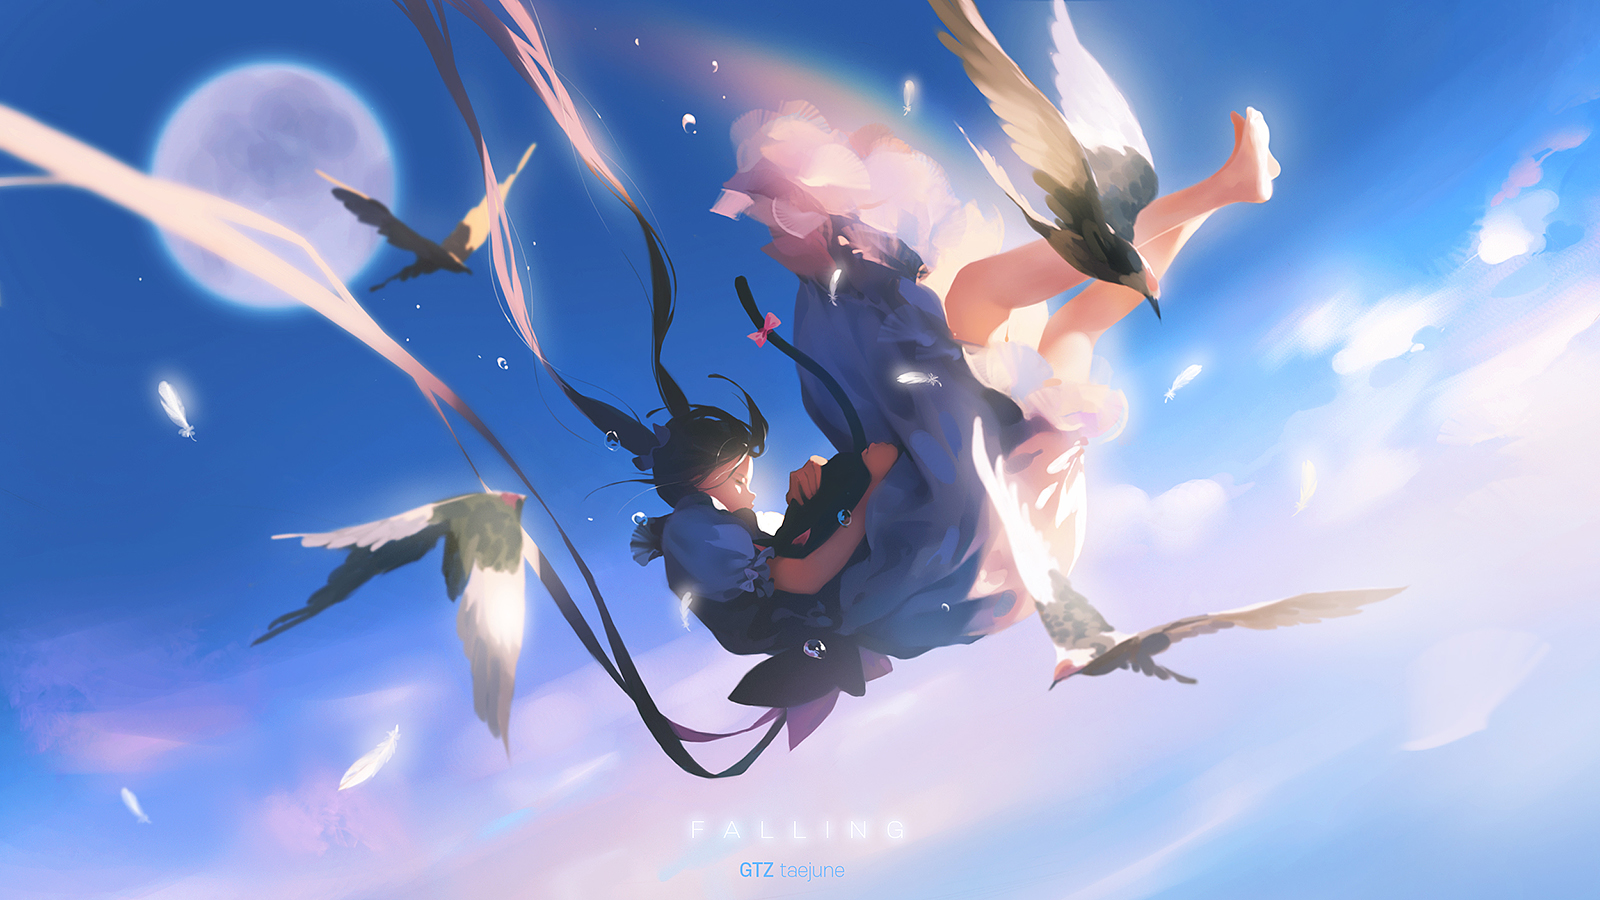 AI Art: falling from the sky by @まめ#2579 | PixAI